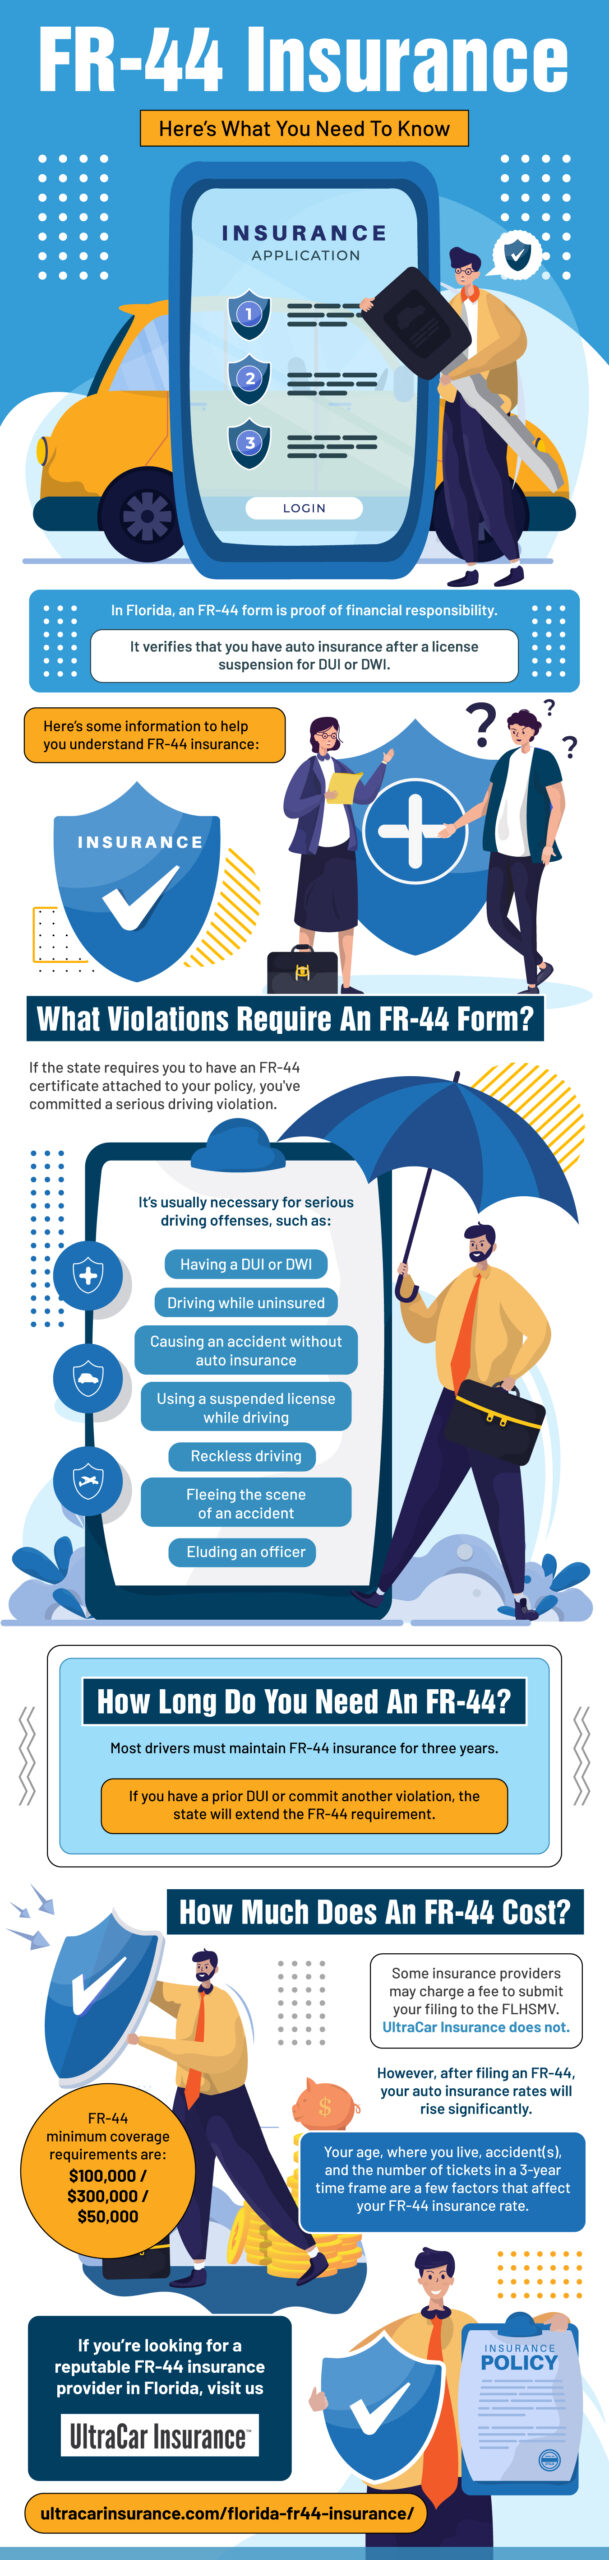 FR-44 Insurance:Here’s What You Need To Know Infograph